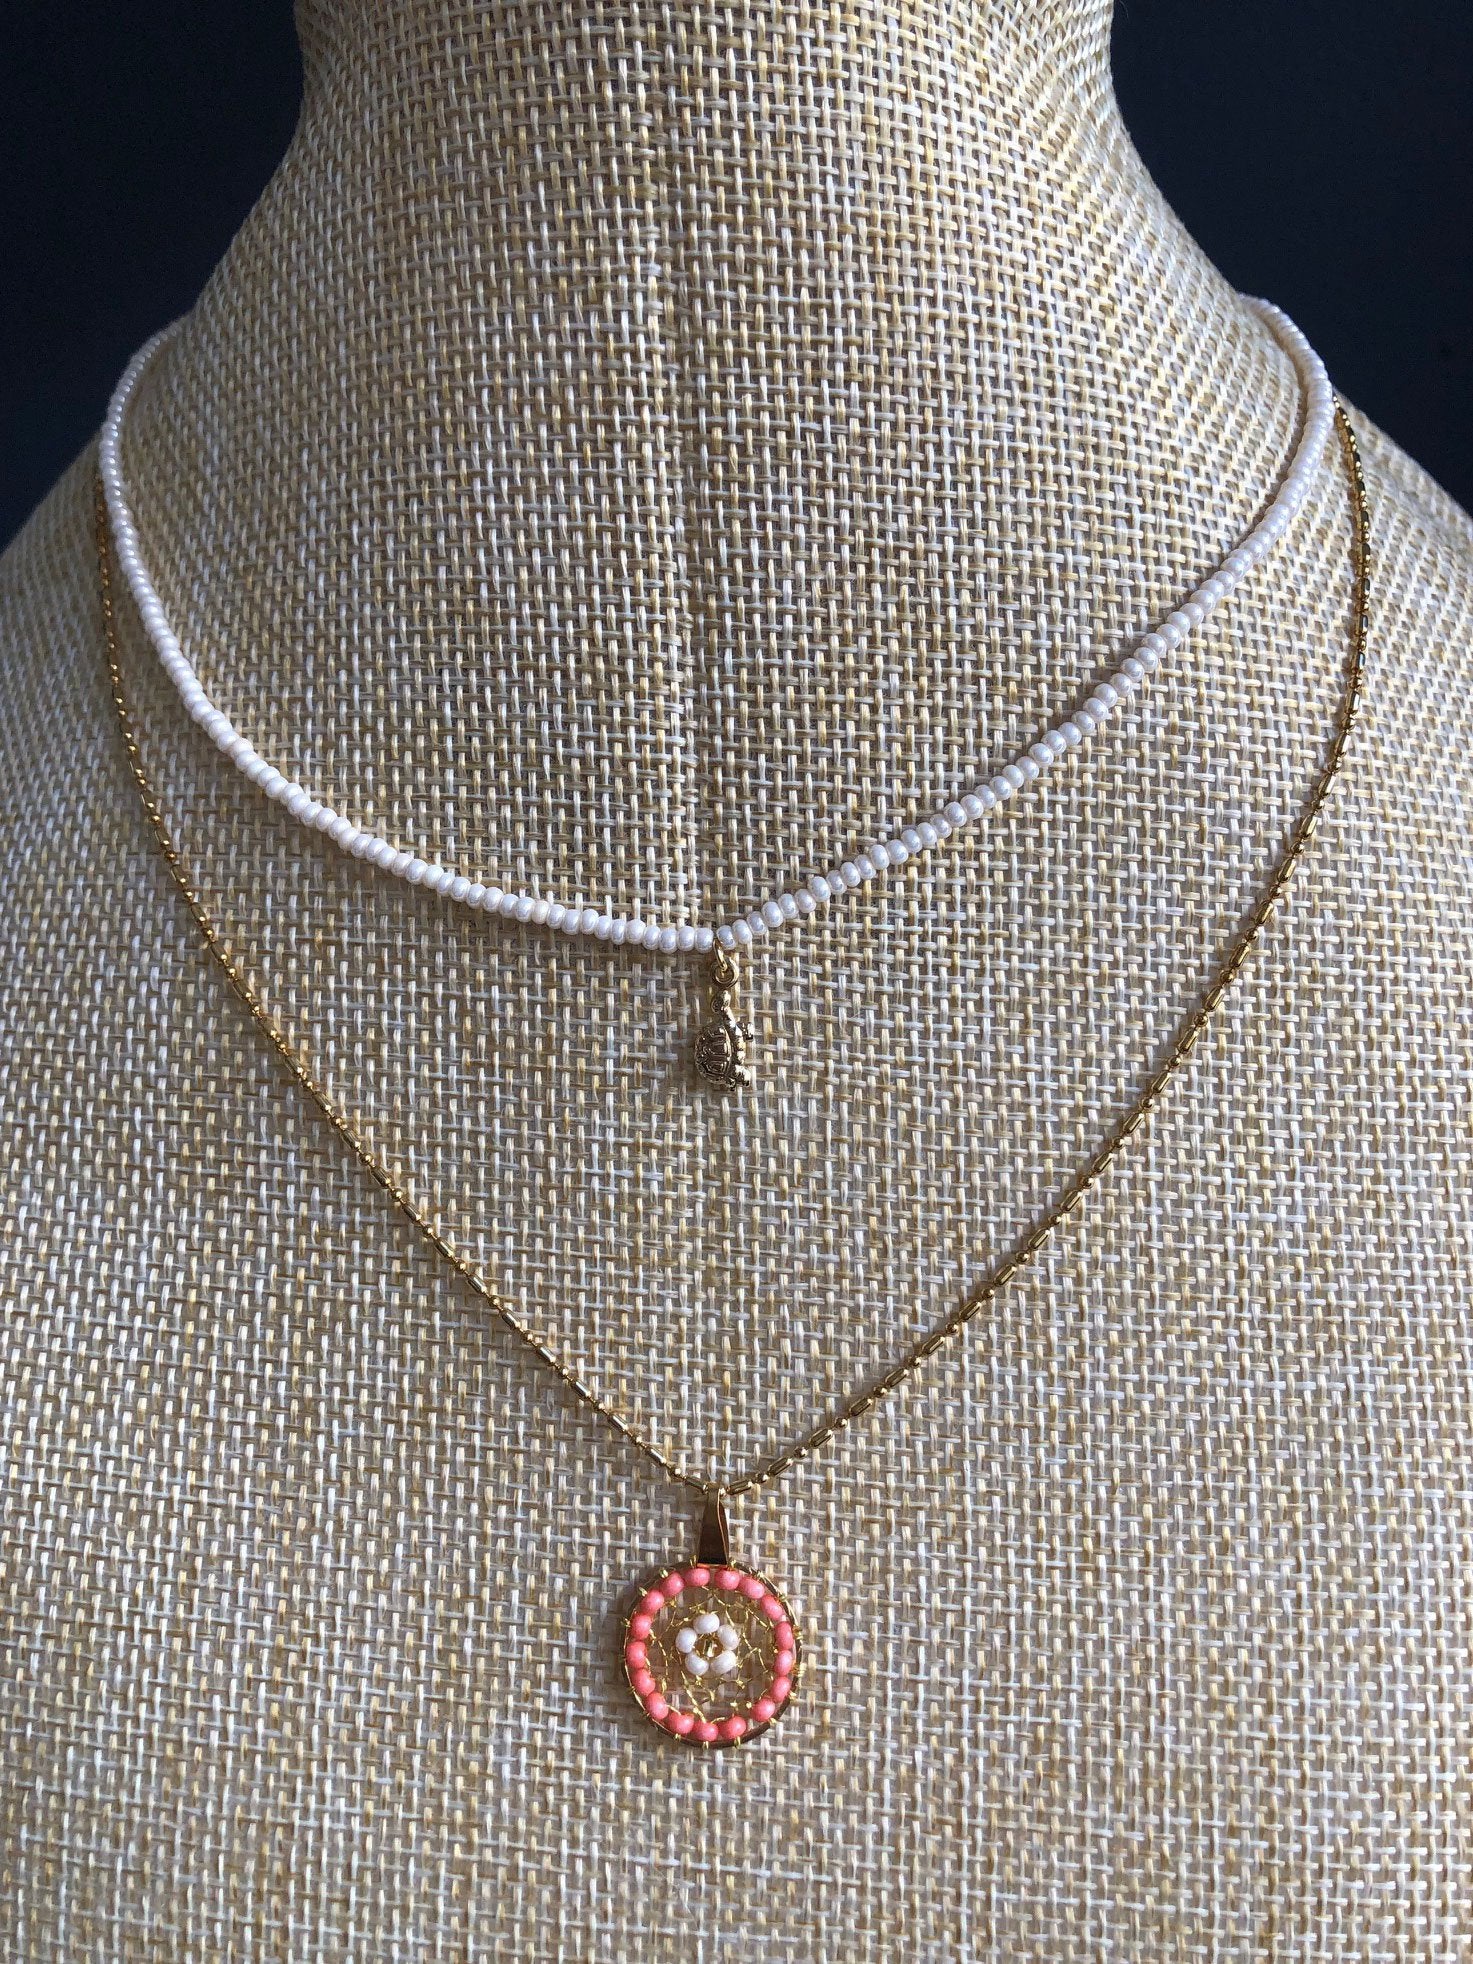 Gold Filled and Chakira Double Necklace Charm Tourtle and Mandala